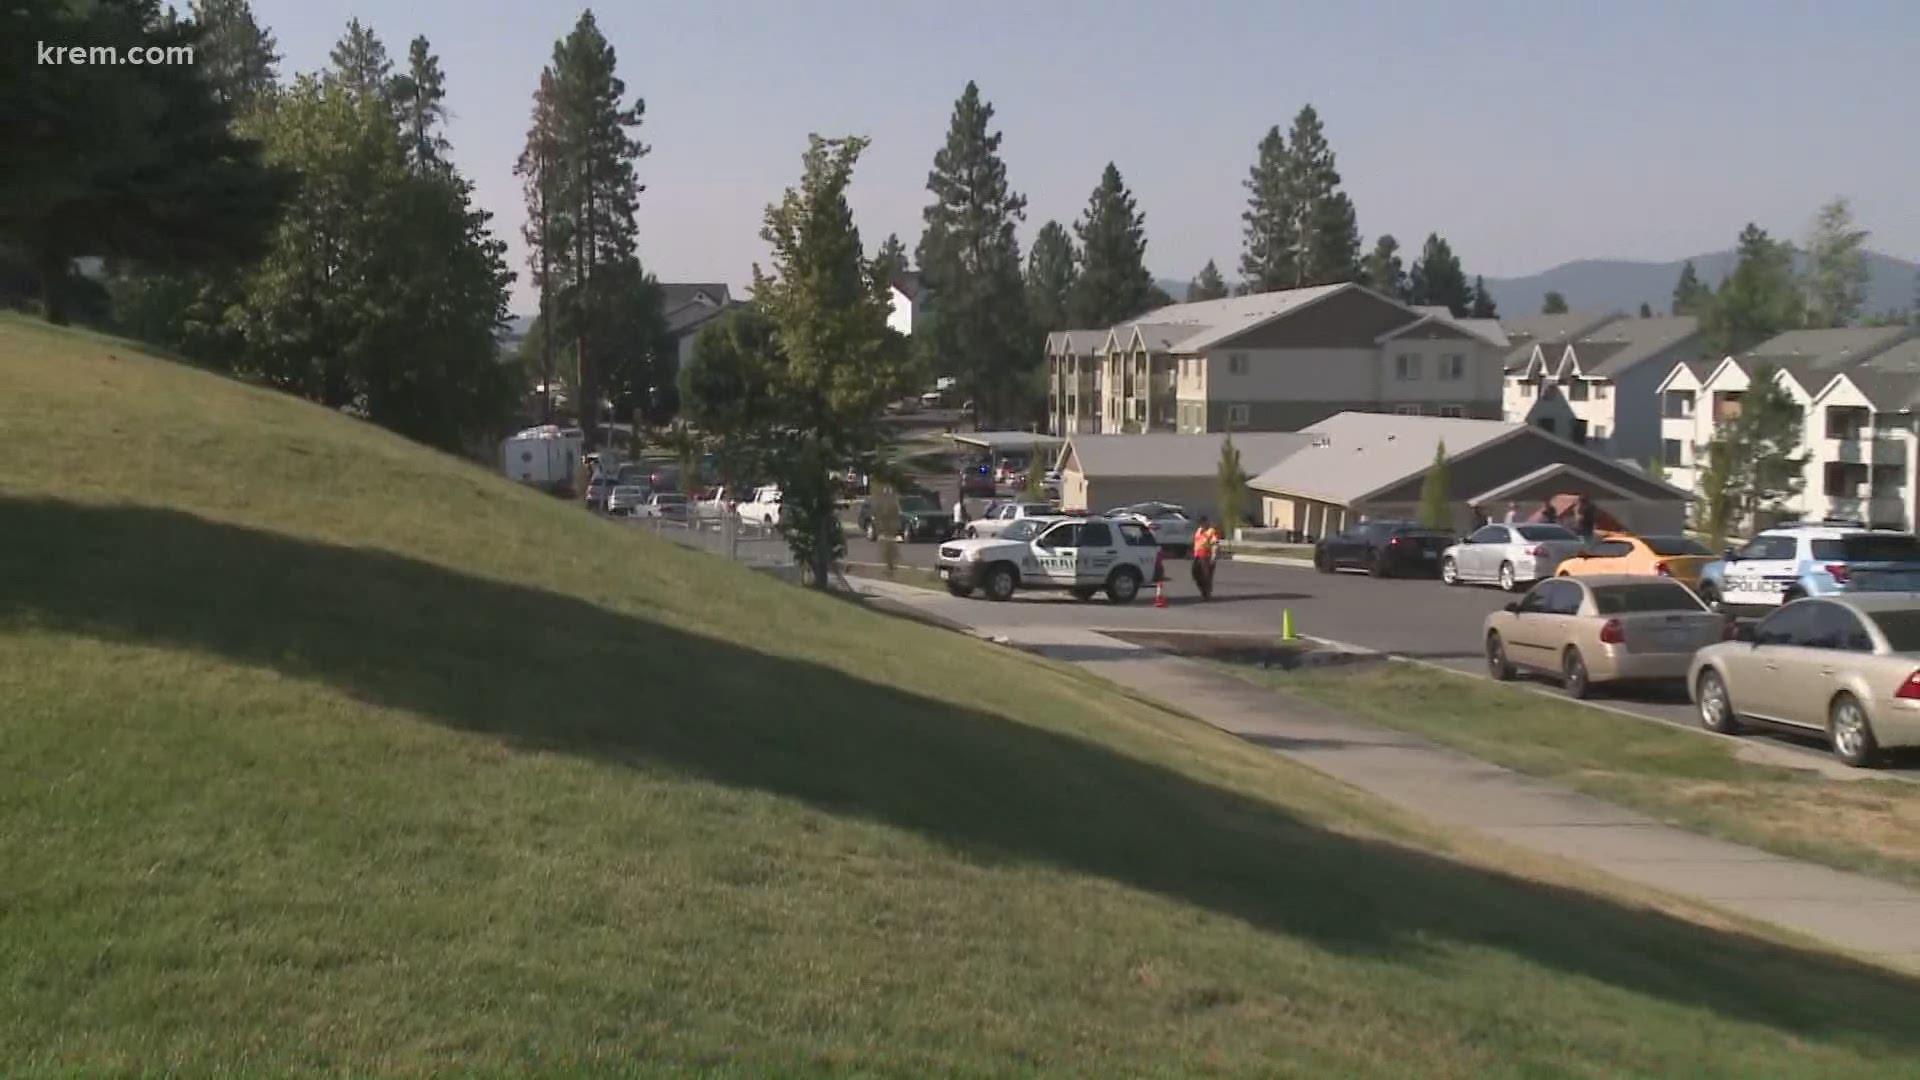 Authorities with the Spokane County Sheriff's Office are searching for a male suspect who they say knew the victim.